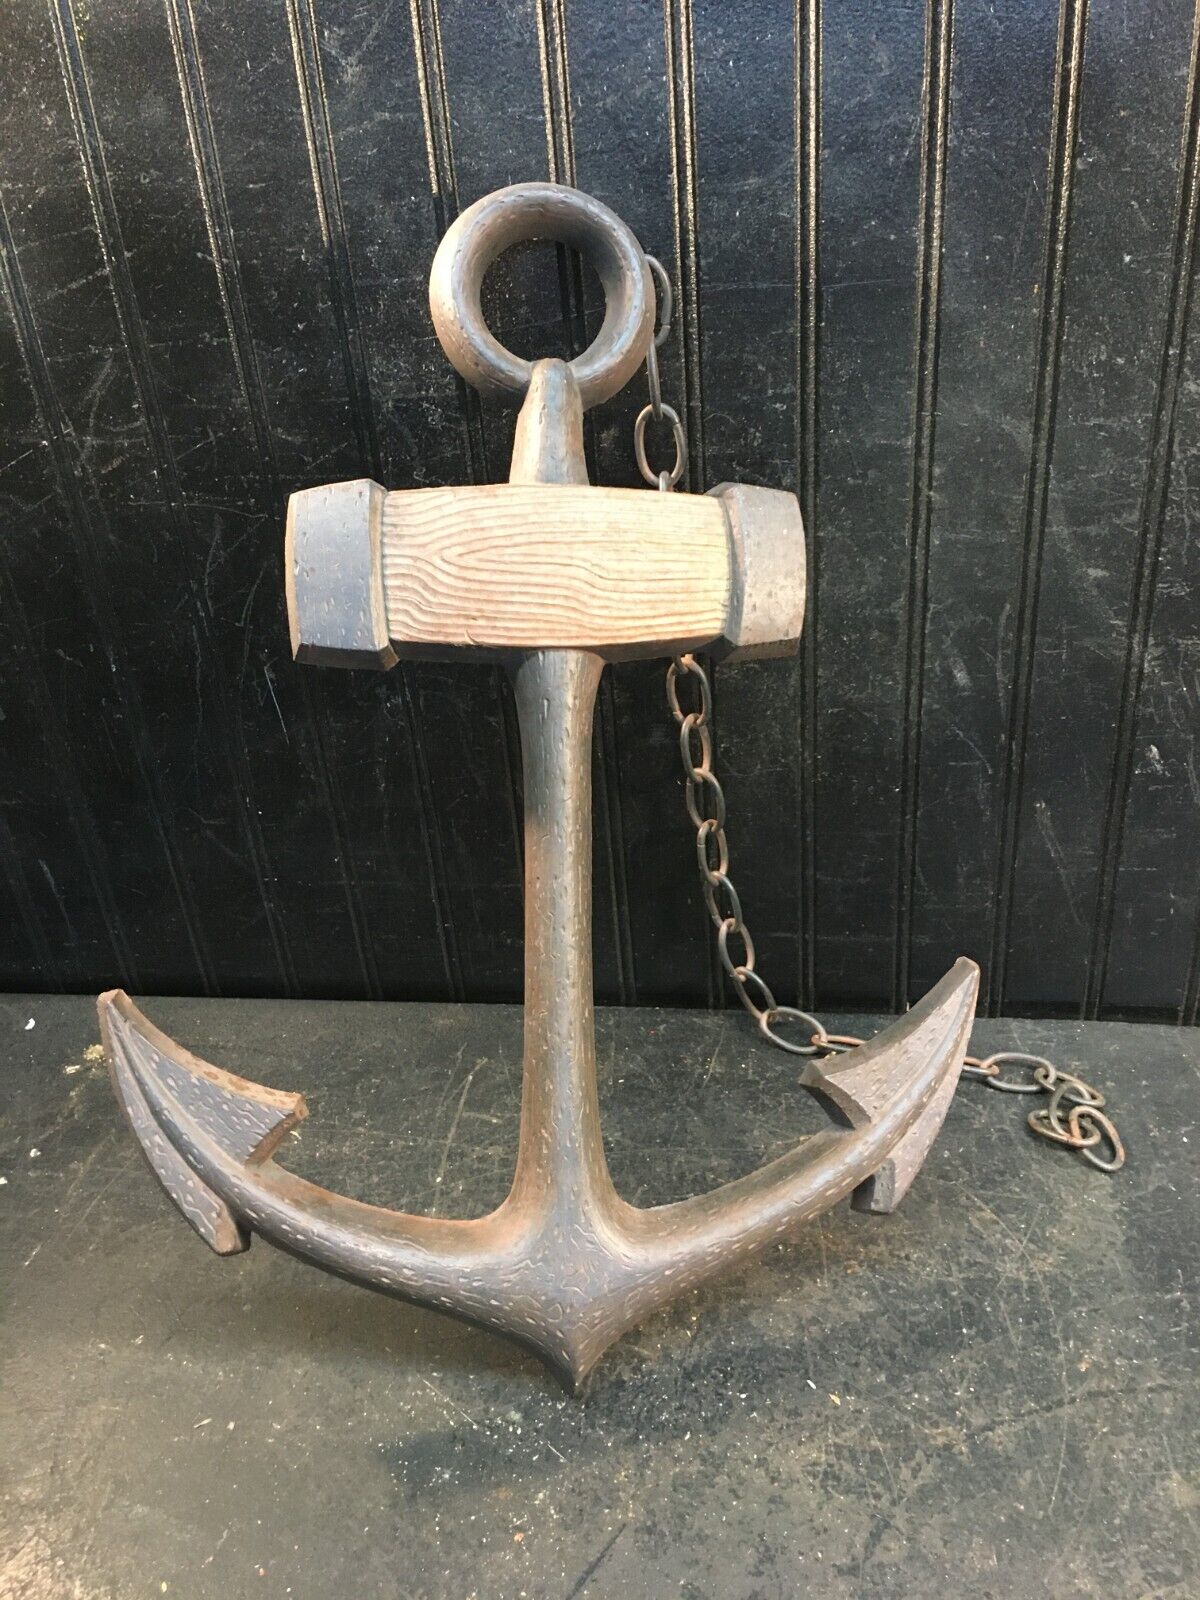 Vintage 1968 Sexton Metal Craft Anchor and Chain Wall Art Decoration 20 x 14 in